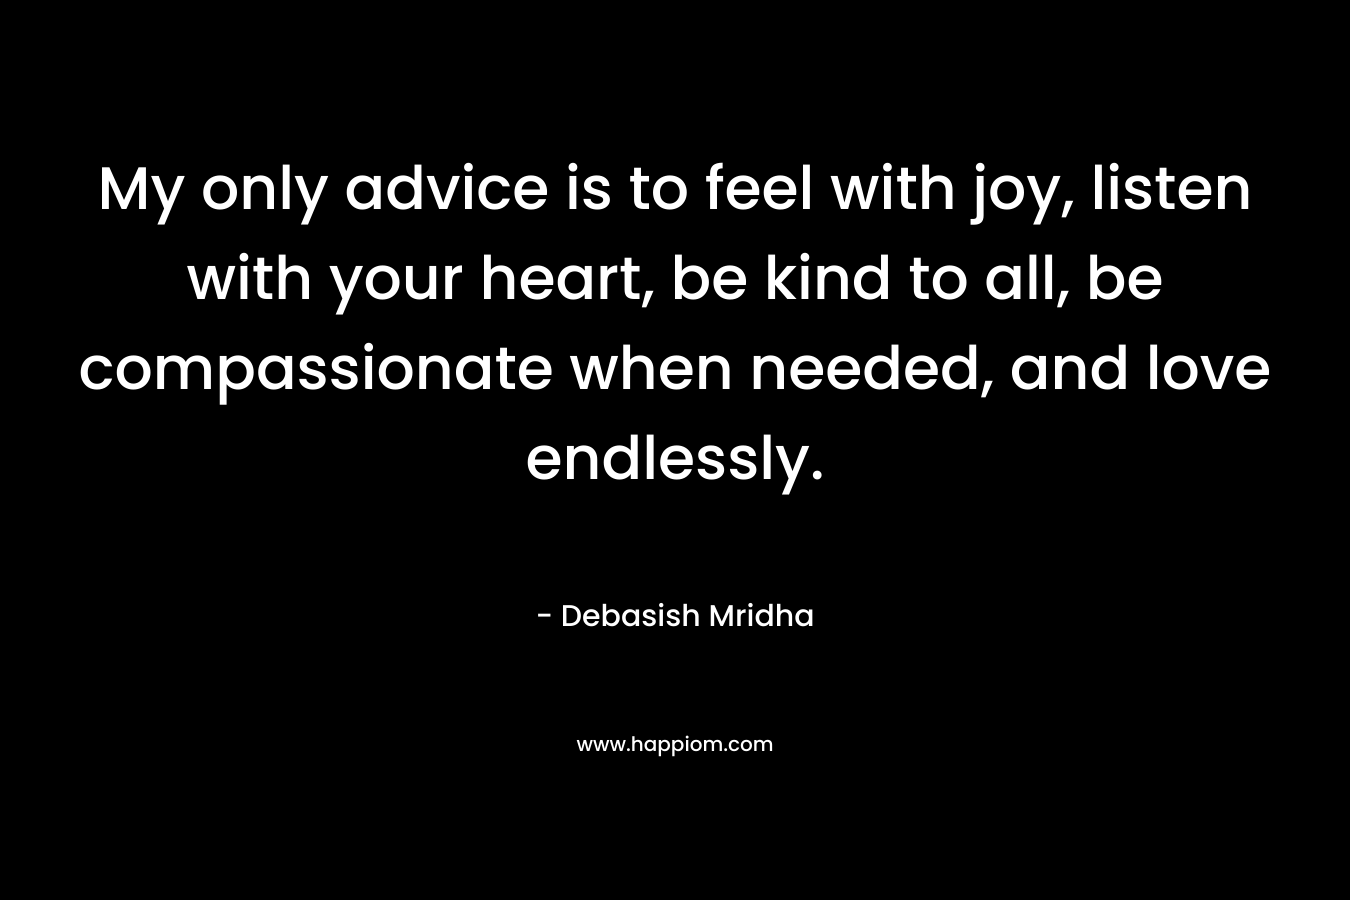 My only advice is to feel with joy, listen with your heart, be kind to all, be compassionate when needed, and love endlessly.